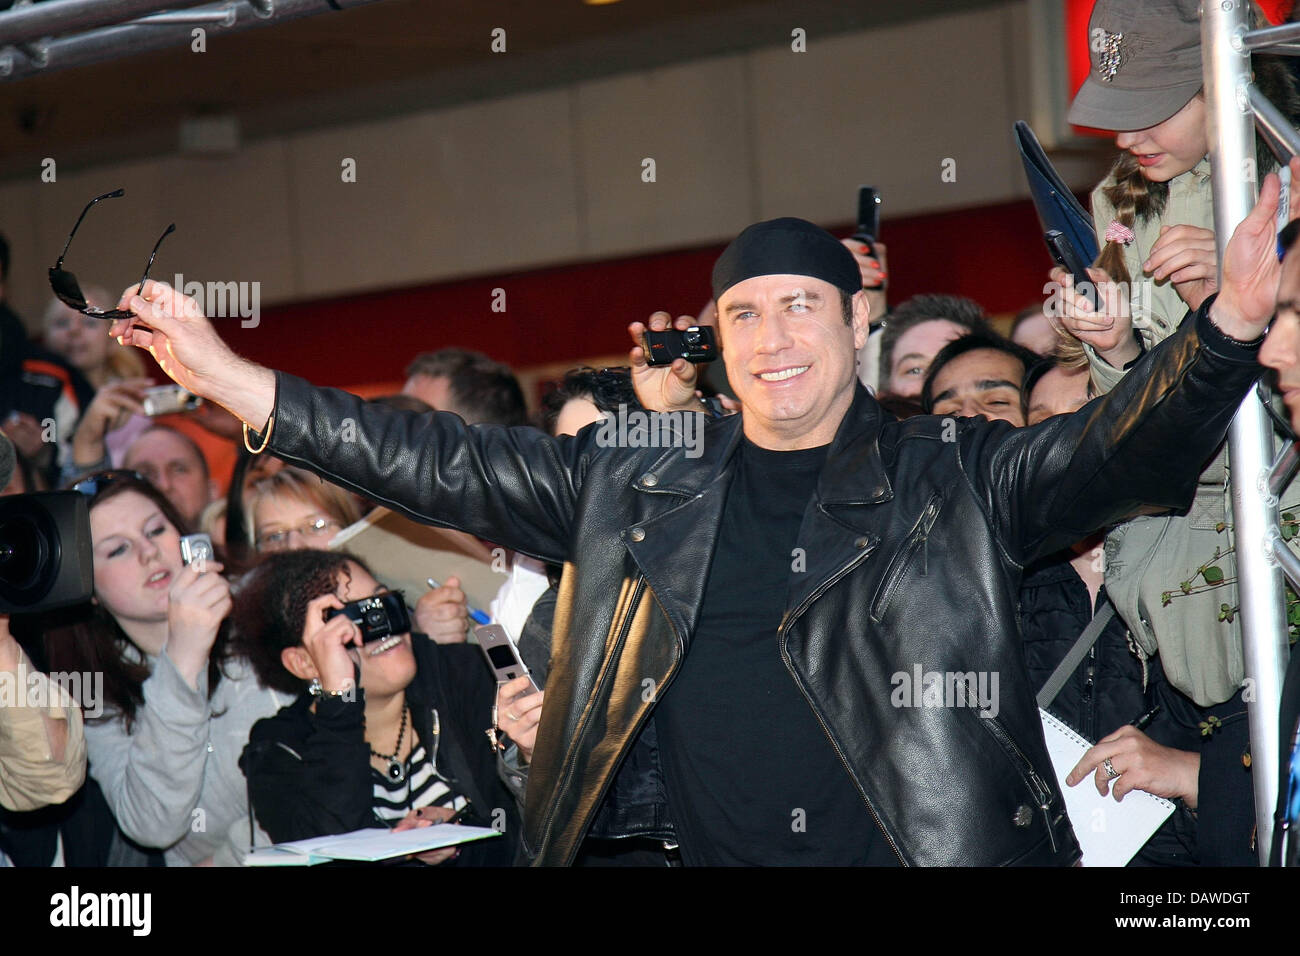 US actor John Travolta poses for the cameras at the German premiere of his film 'Born to be wild' in Munich, Germany, Monday, 02 April 2007. Photo: Ursula Dueren Stock Photo